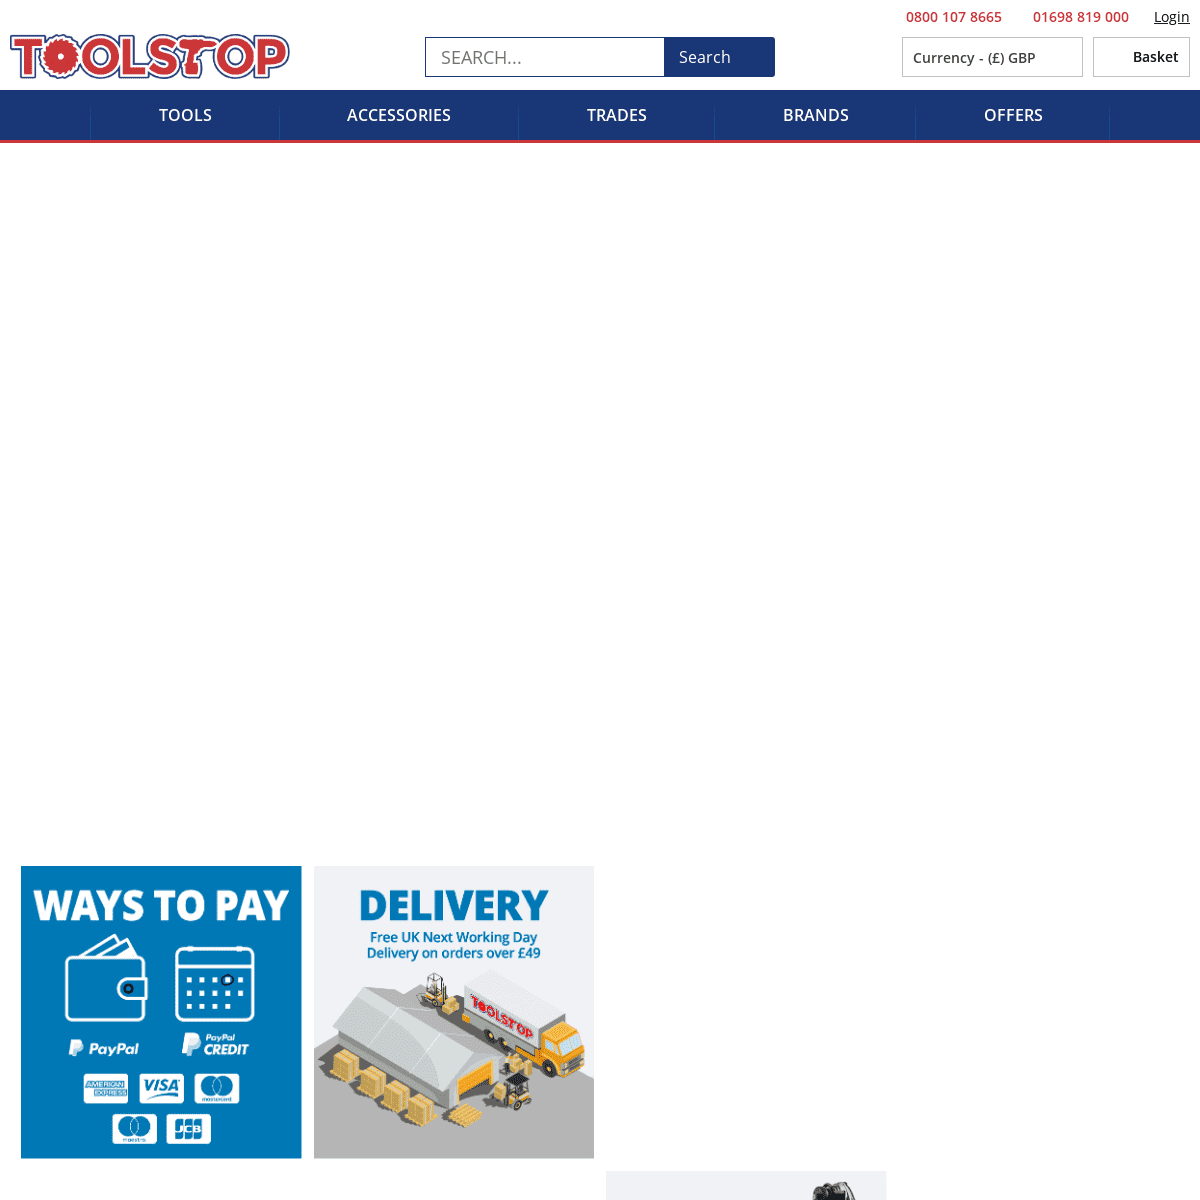 A complete backup of toolstop.co.uk